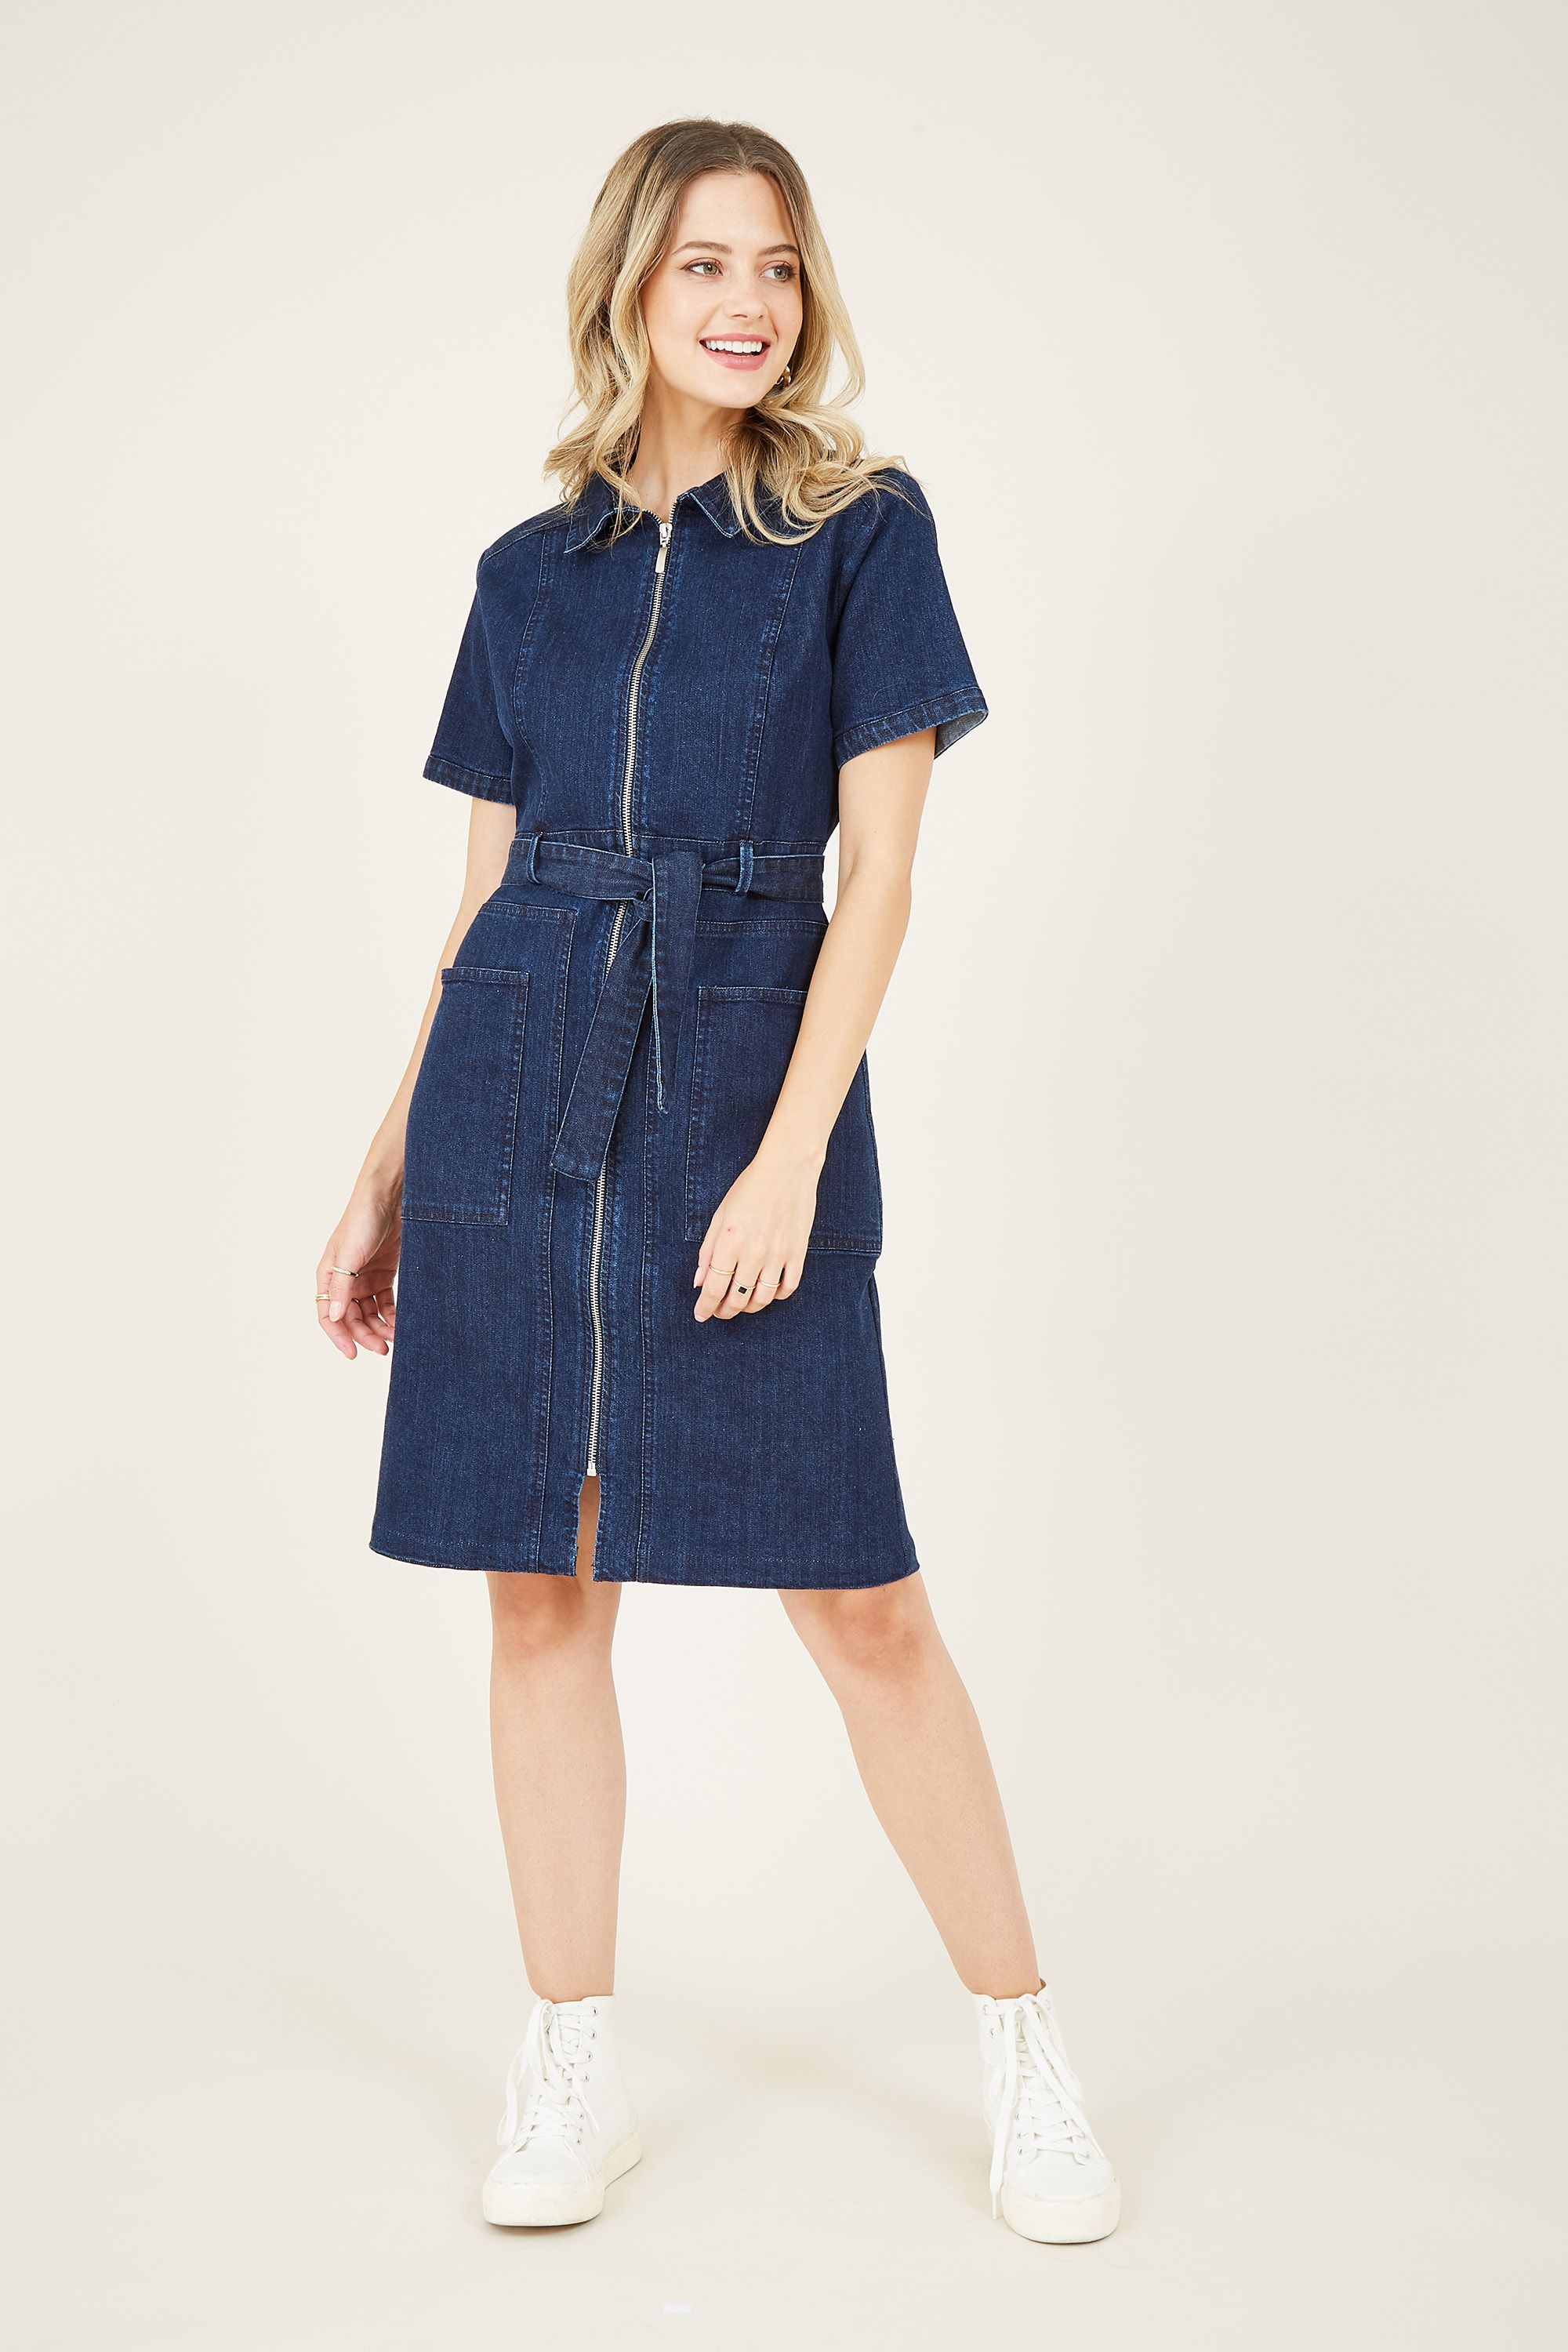 An easy alternative to jeans, our Denim Zip Shirt Dress is a timeless classic you will wear over and over. With a knee-length design, it's semi-fitted with a tie waist and a modern zip running down the front. With practical pockets sat on the hips, the cotton fabric brings heaps of comfort to your off-duty look.